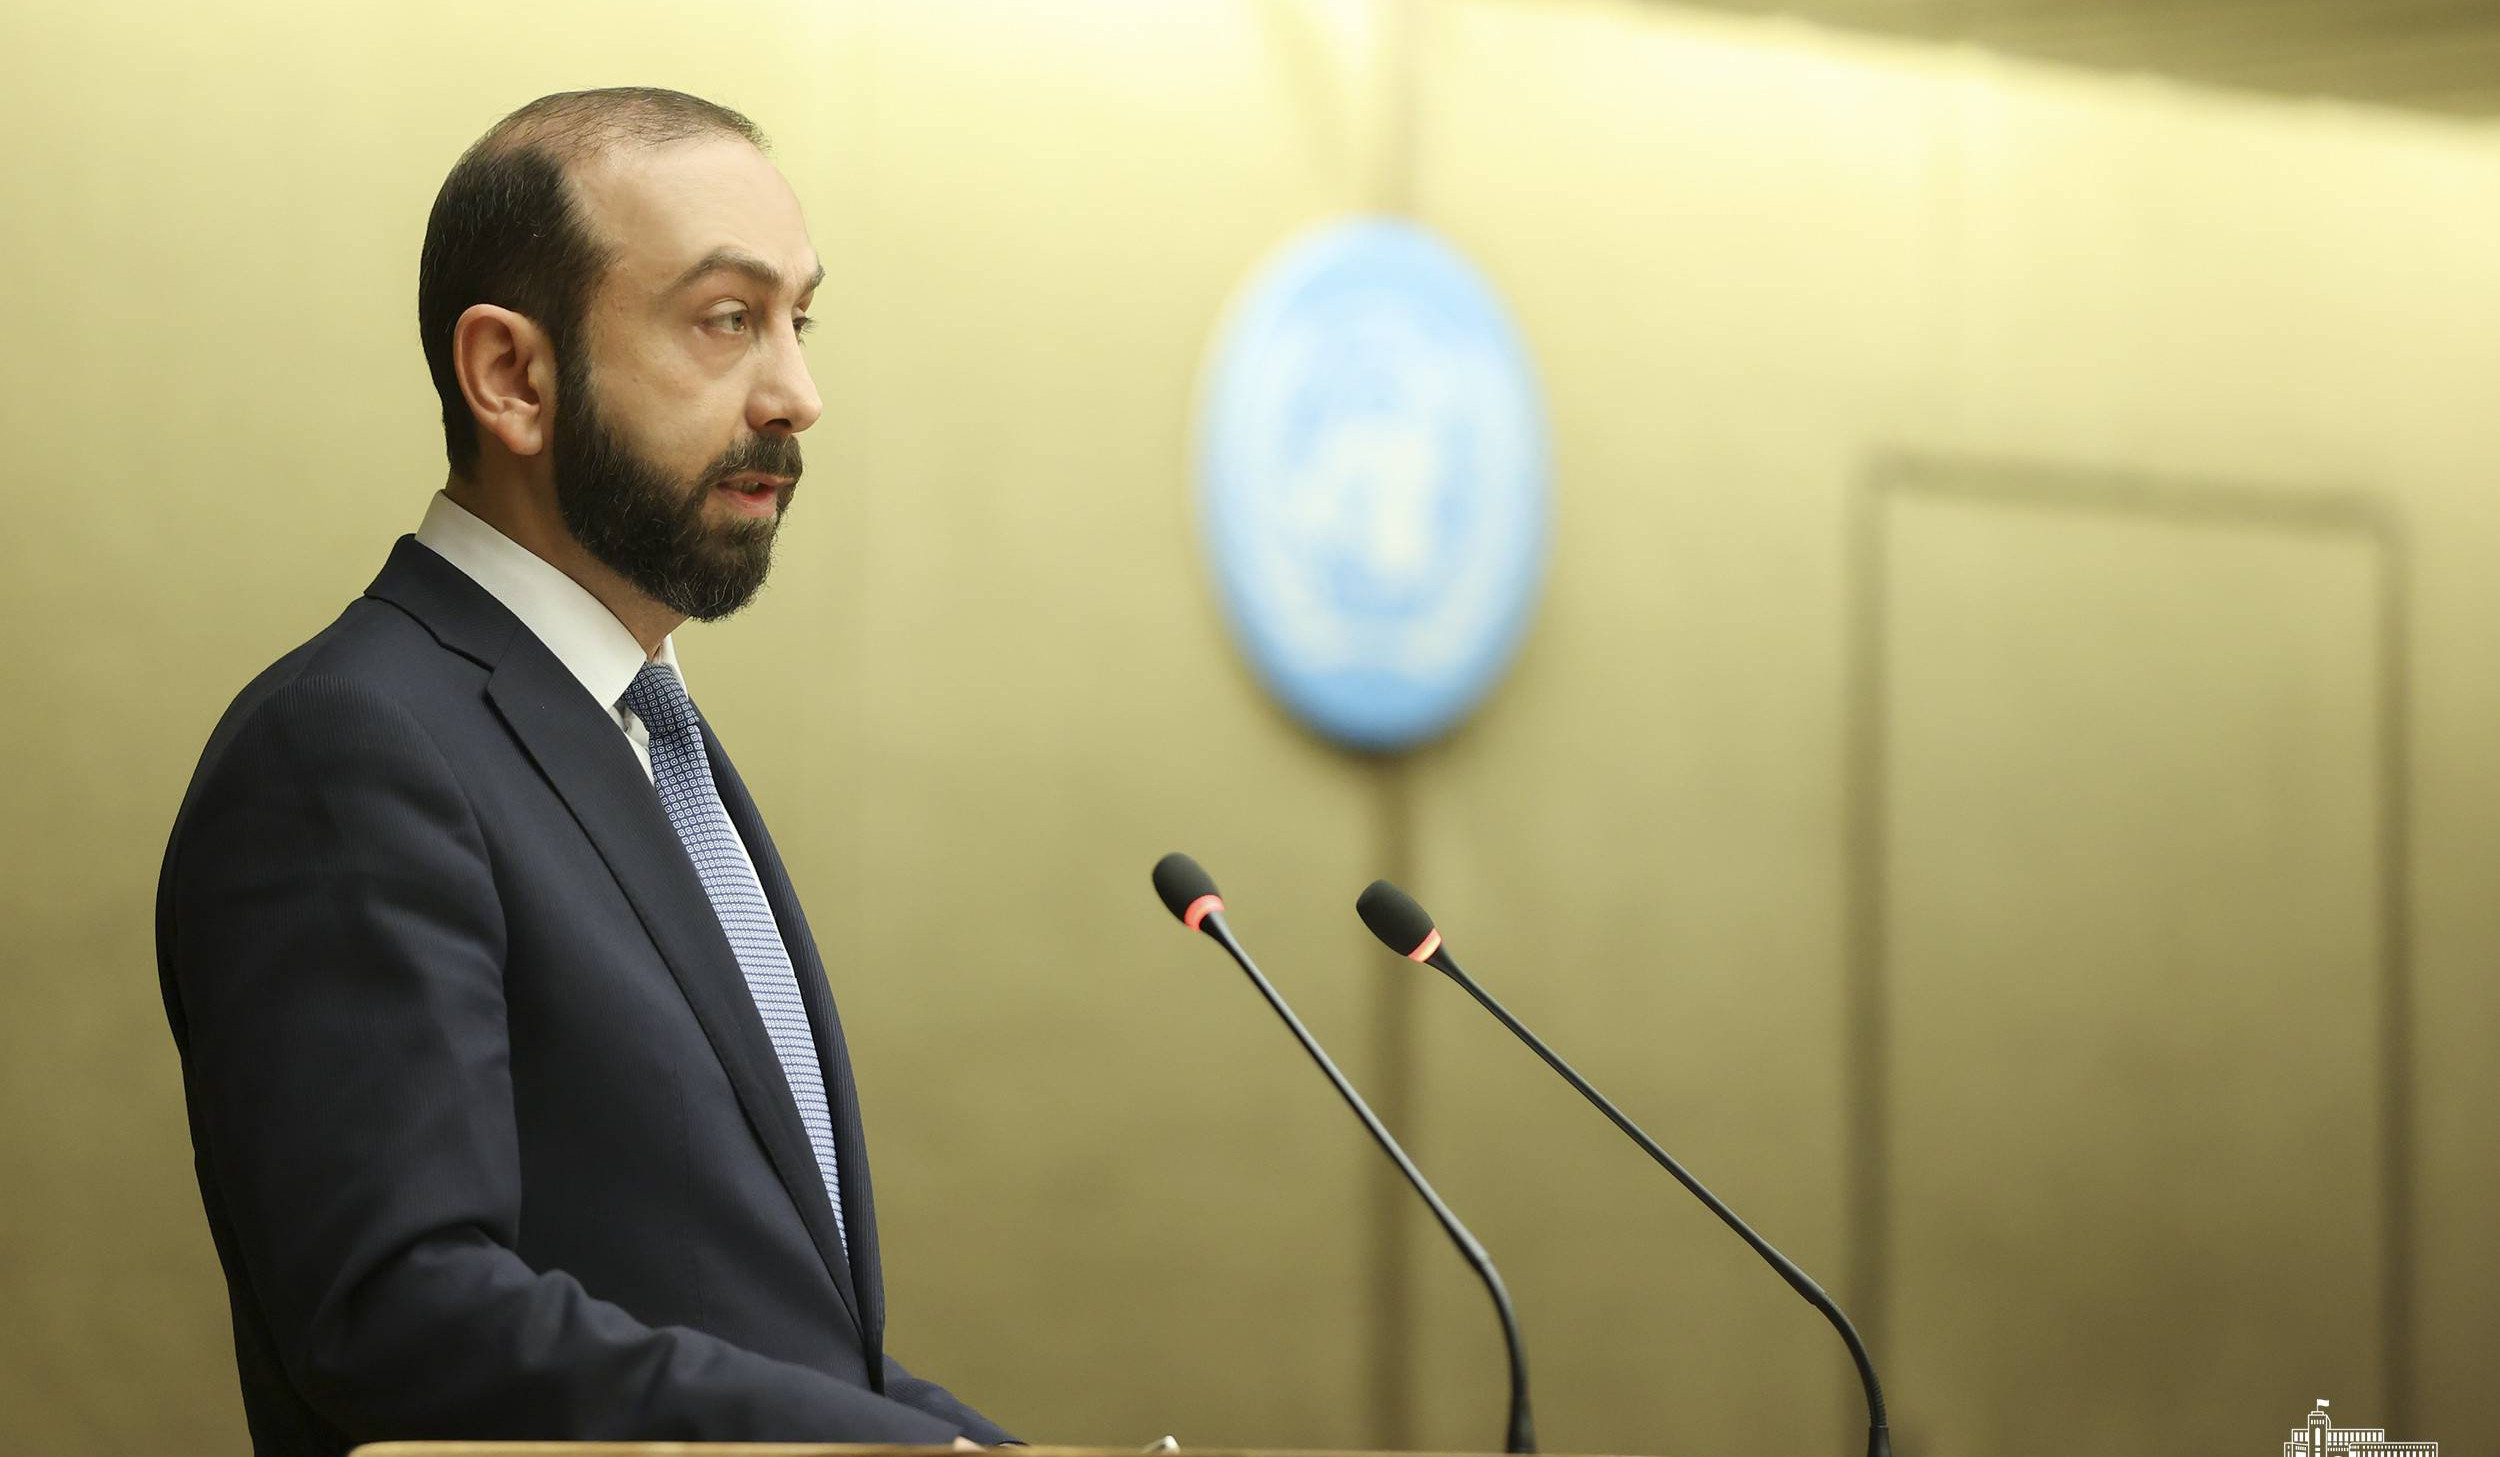 Armenia proposes to sign a bilateral arms control mechanism and non-aggression pact ahead of the peace treaty with Azerbaijan, Mirzoyan